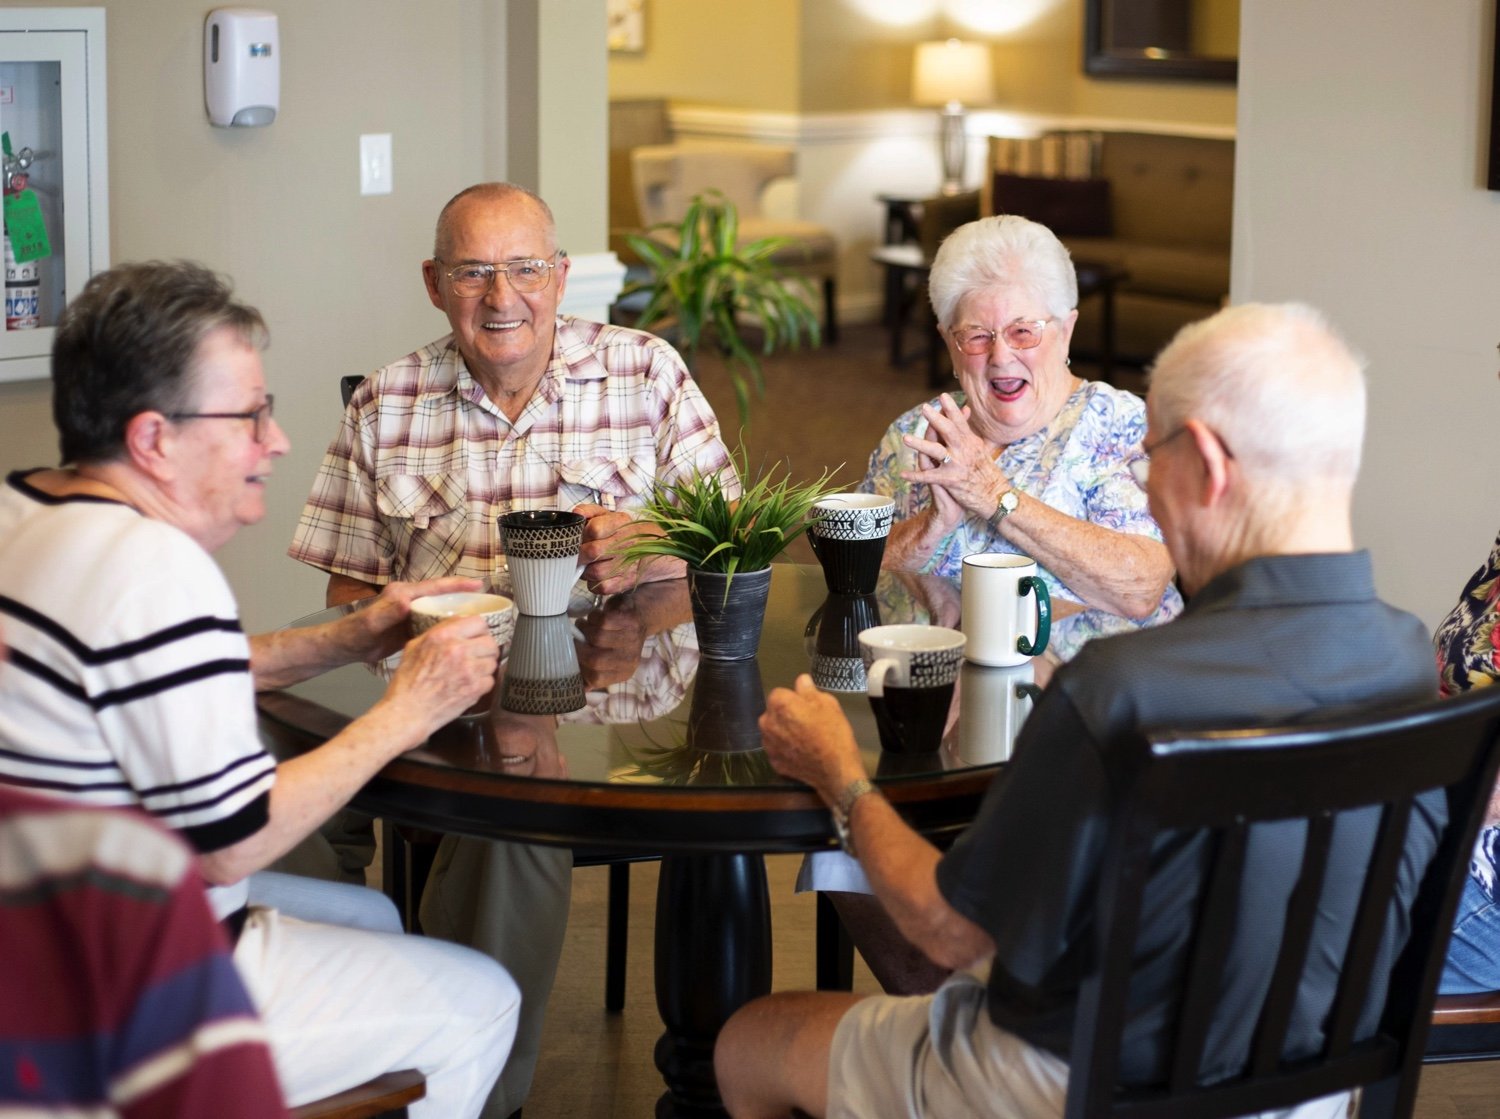 Residents dining together